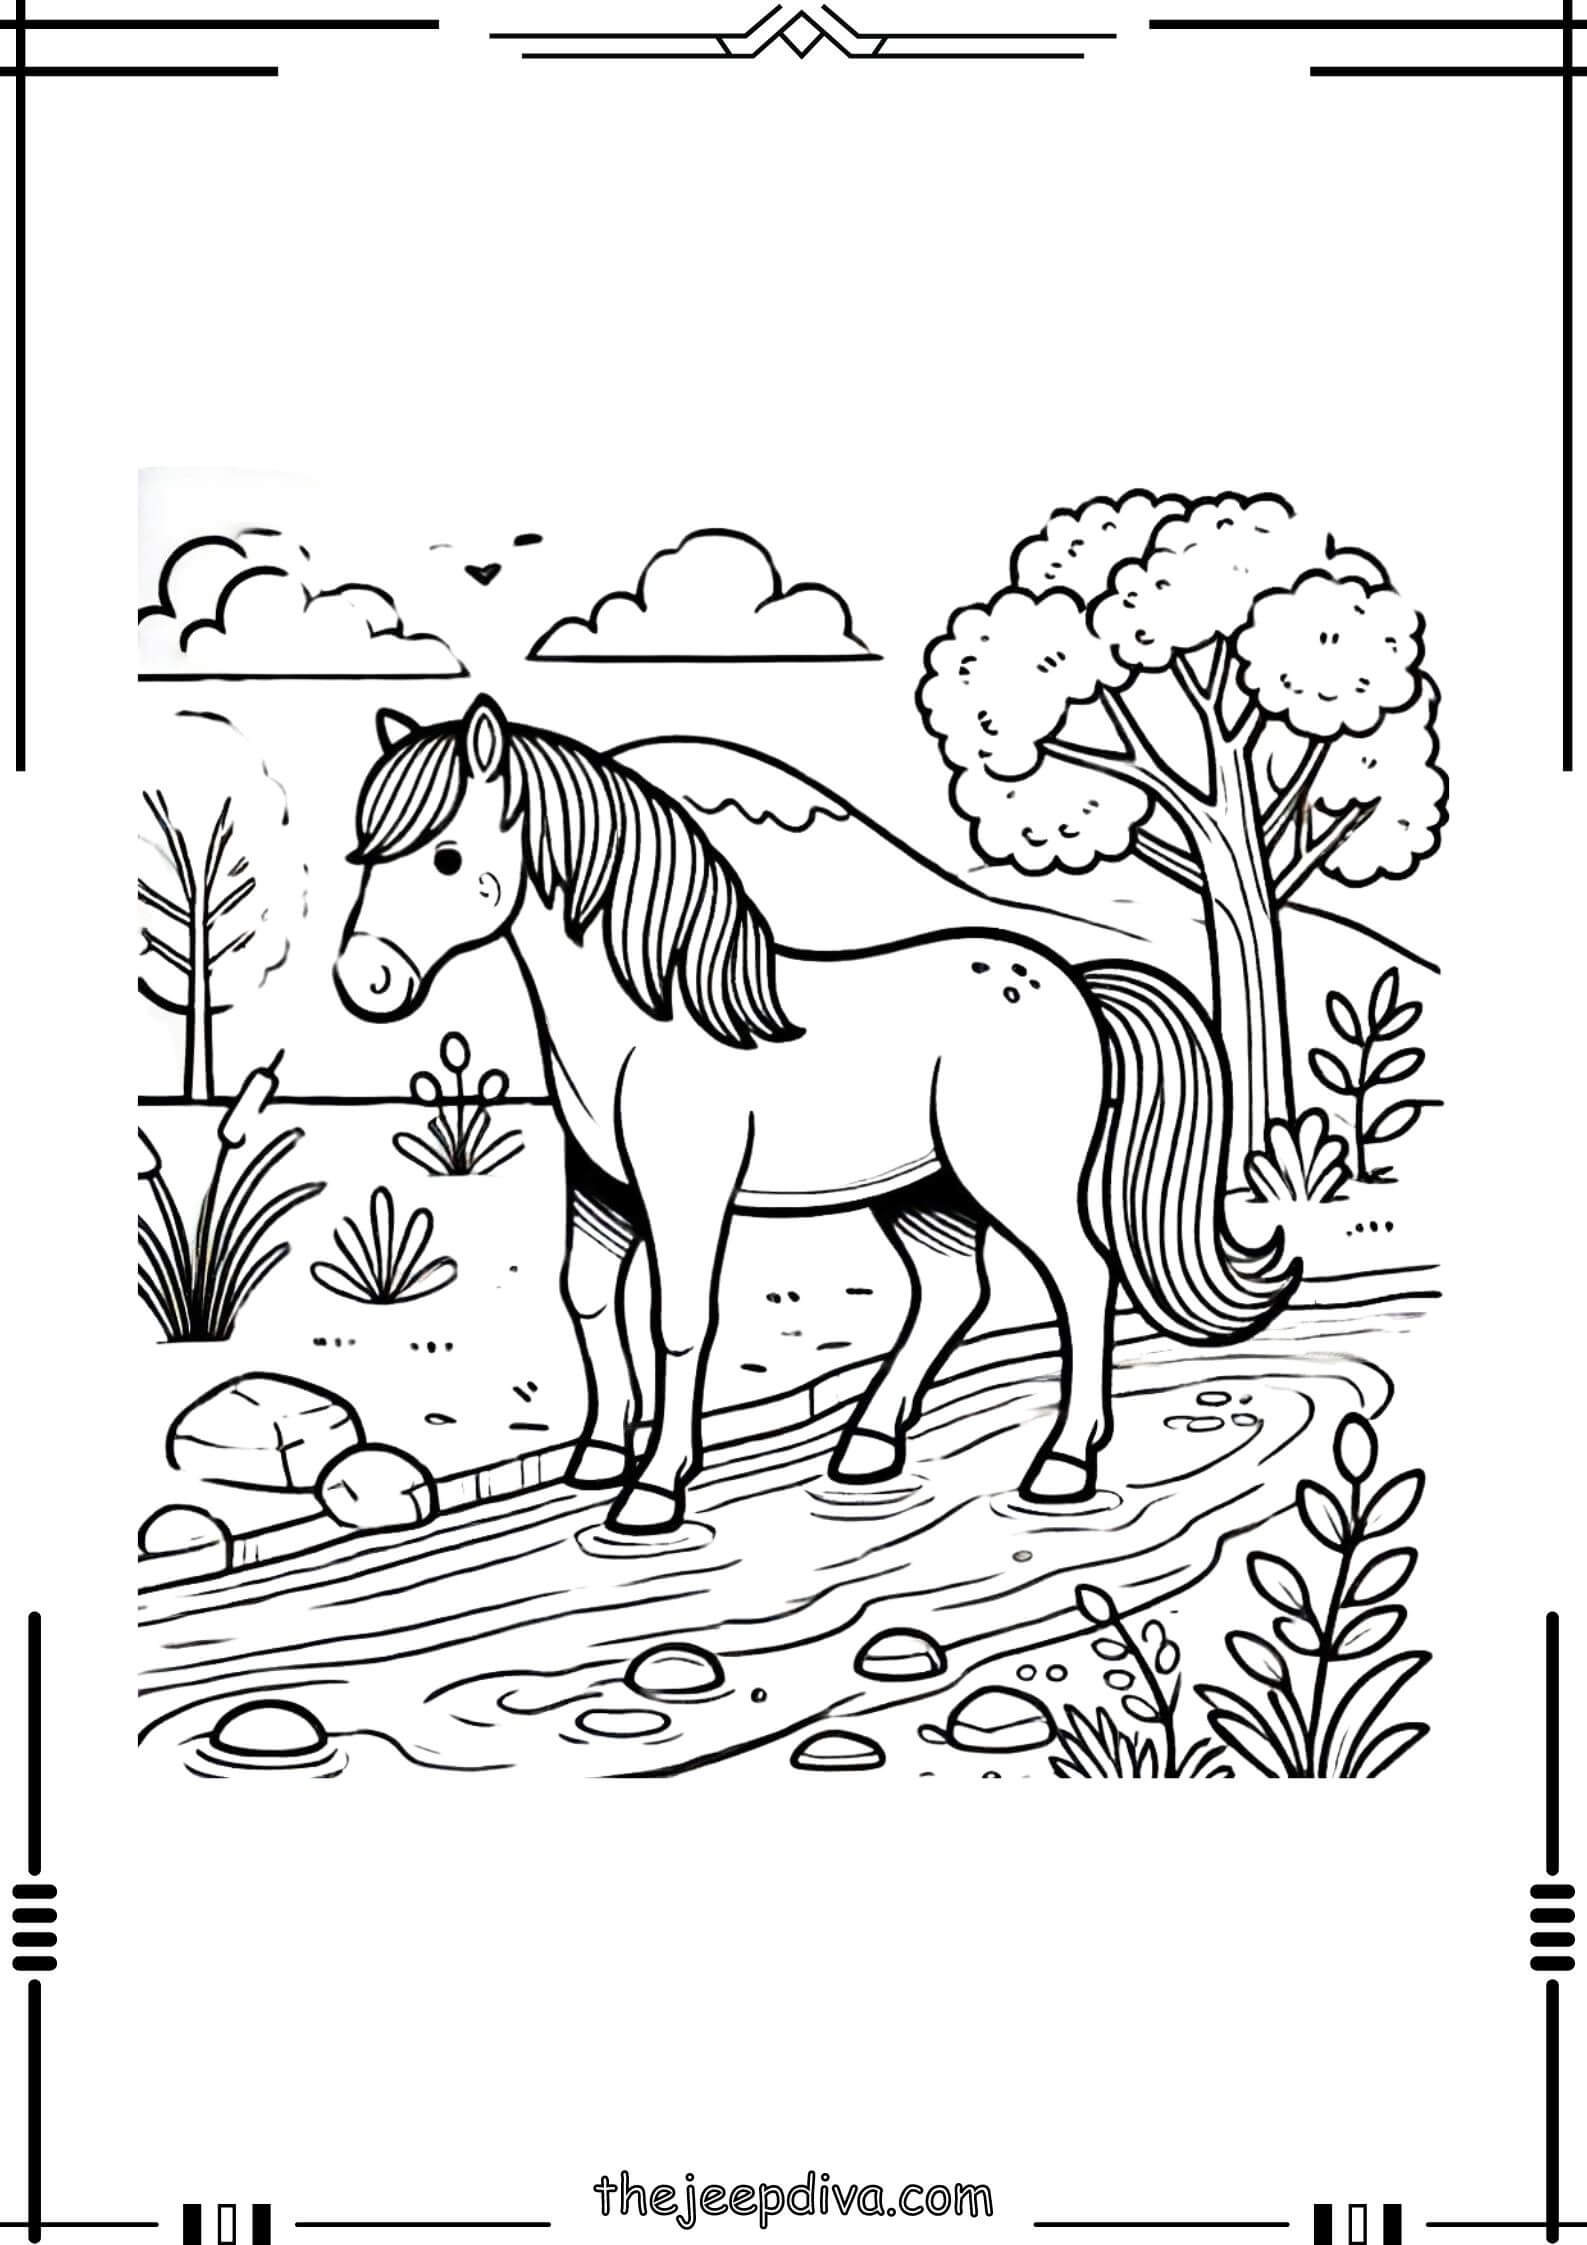 Horse-Colouring-Pages-Medium-13